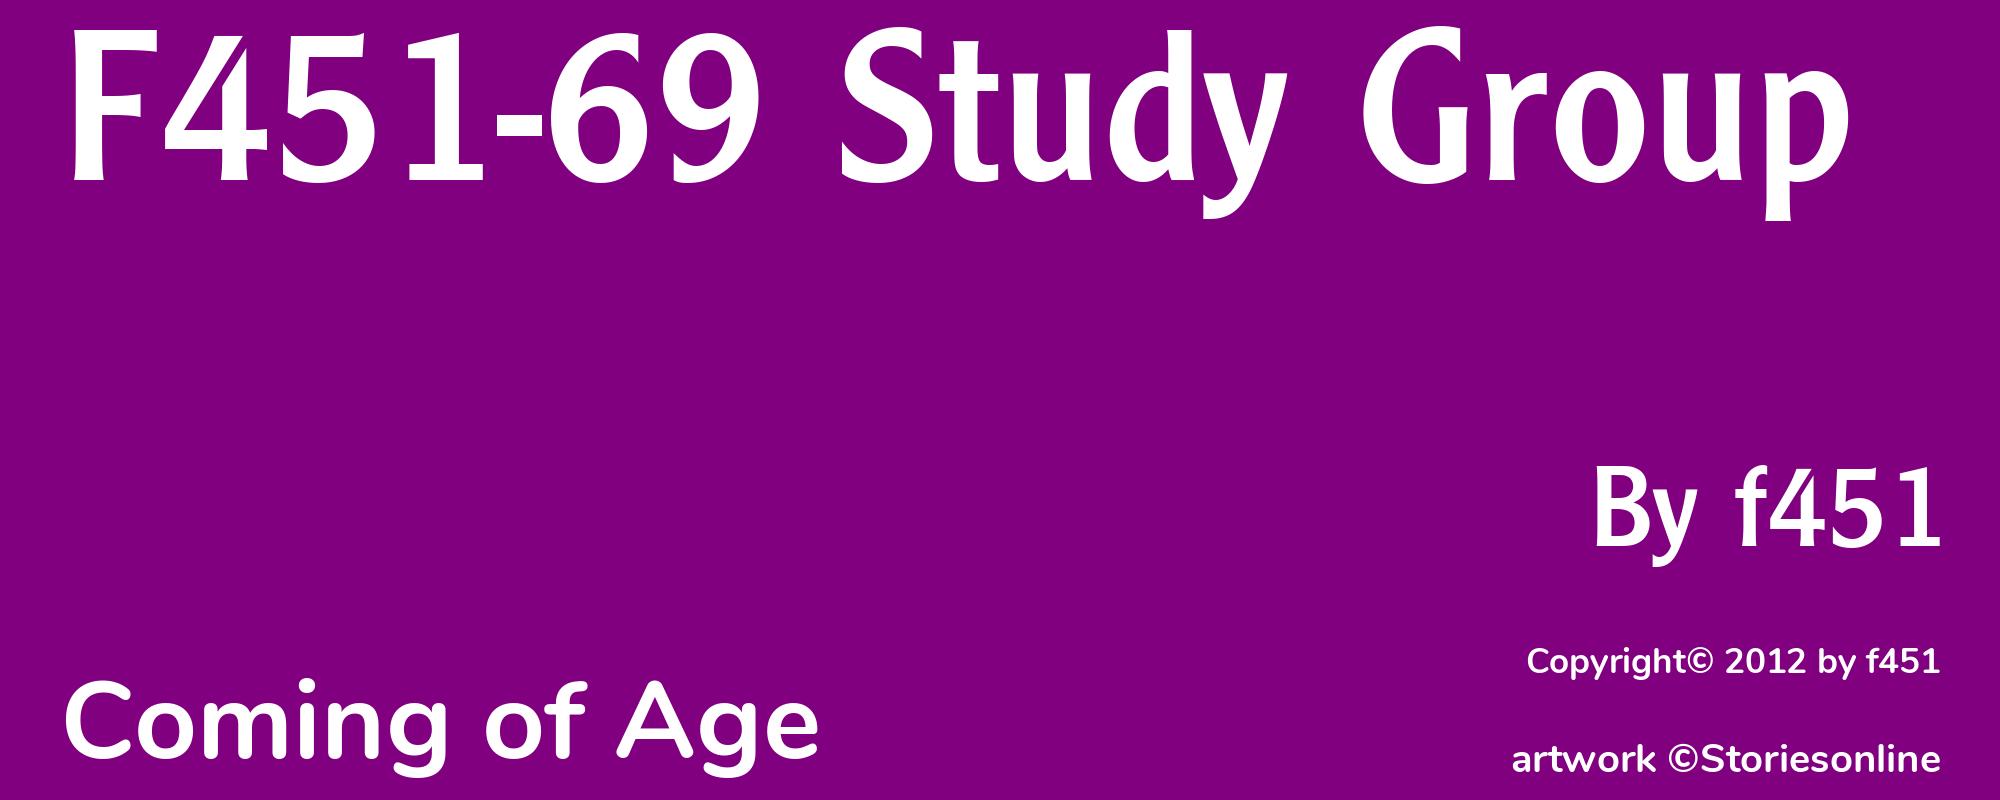 F451-69 Study Group - Cover